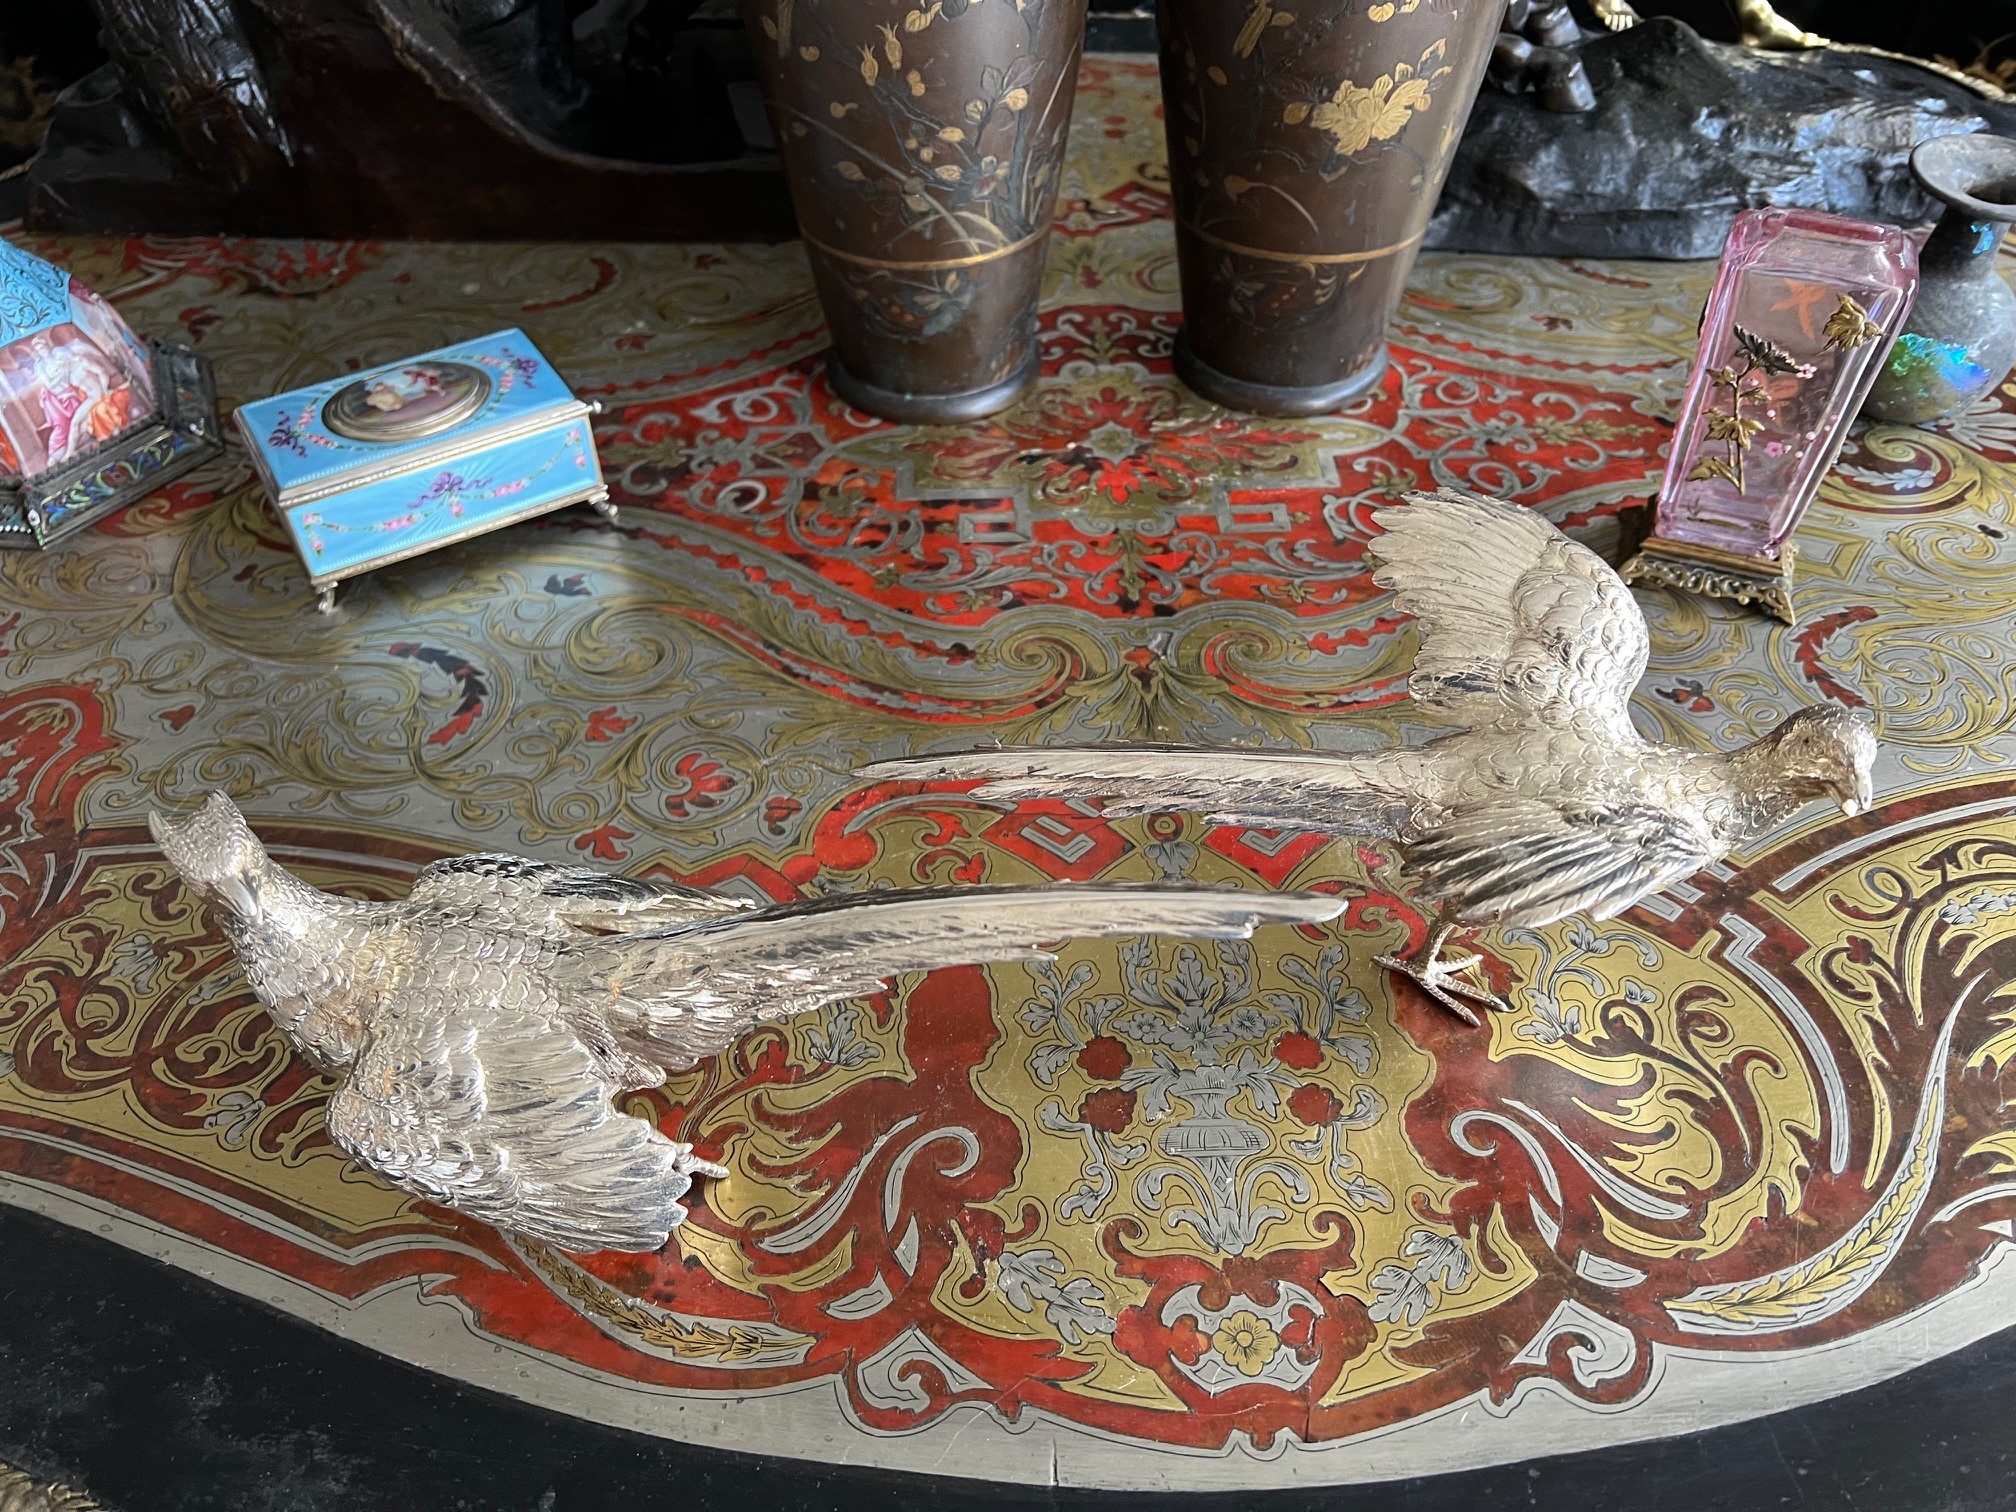 A PAIR OF STERLING SILVER MODELS OF PHEASANTS - Image 7 of 9